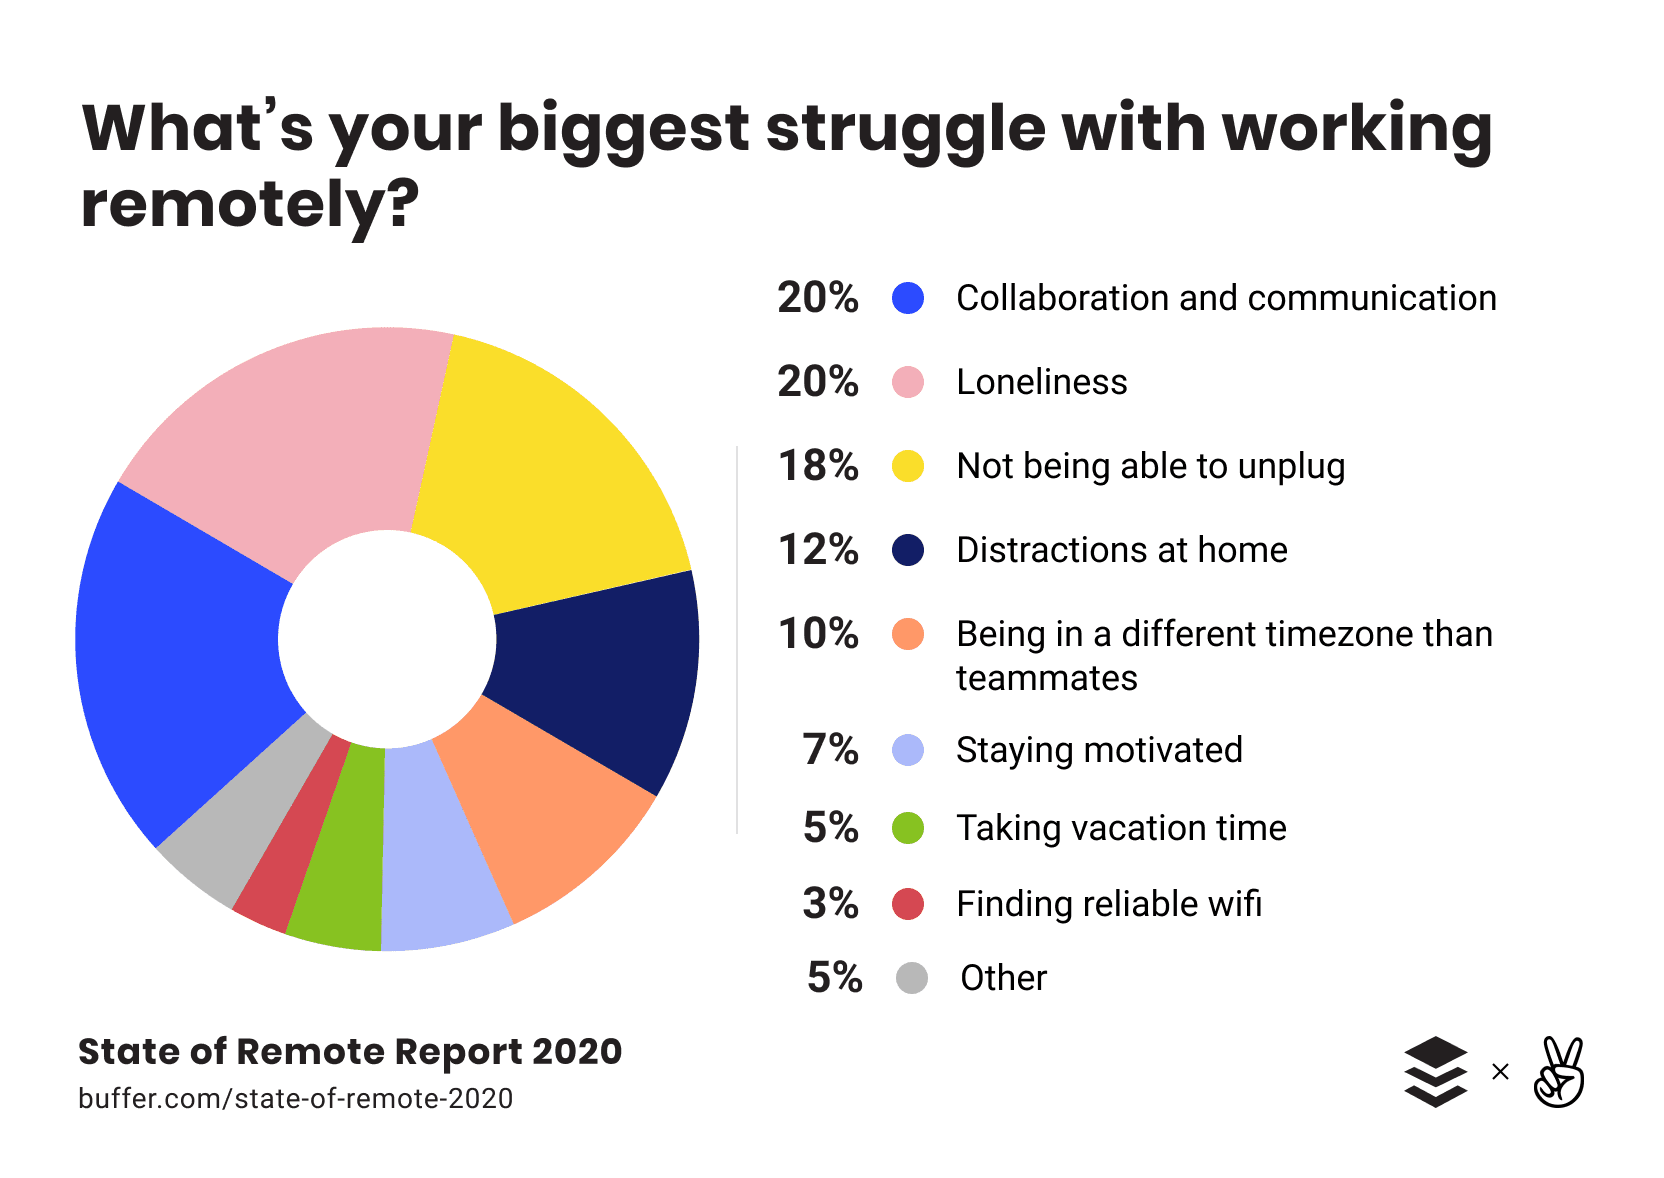 Whats your biggest struggle with working remotely?